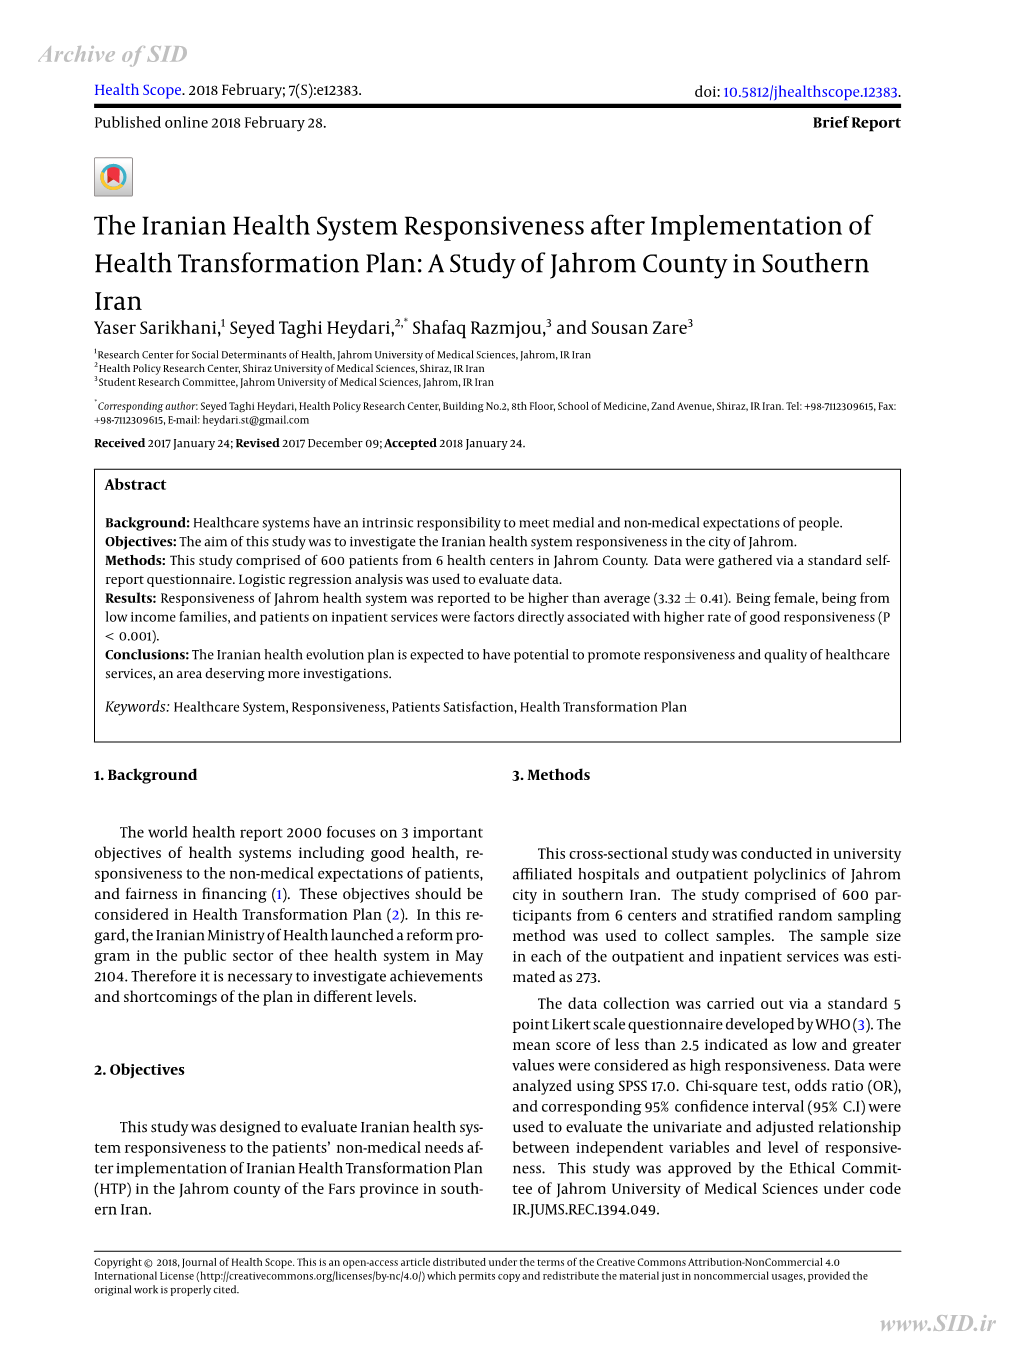 The Iranian Health System Responsiveness After Implementation of Health Transformation Plan: a Study of Jahrom County in Souther